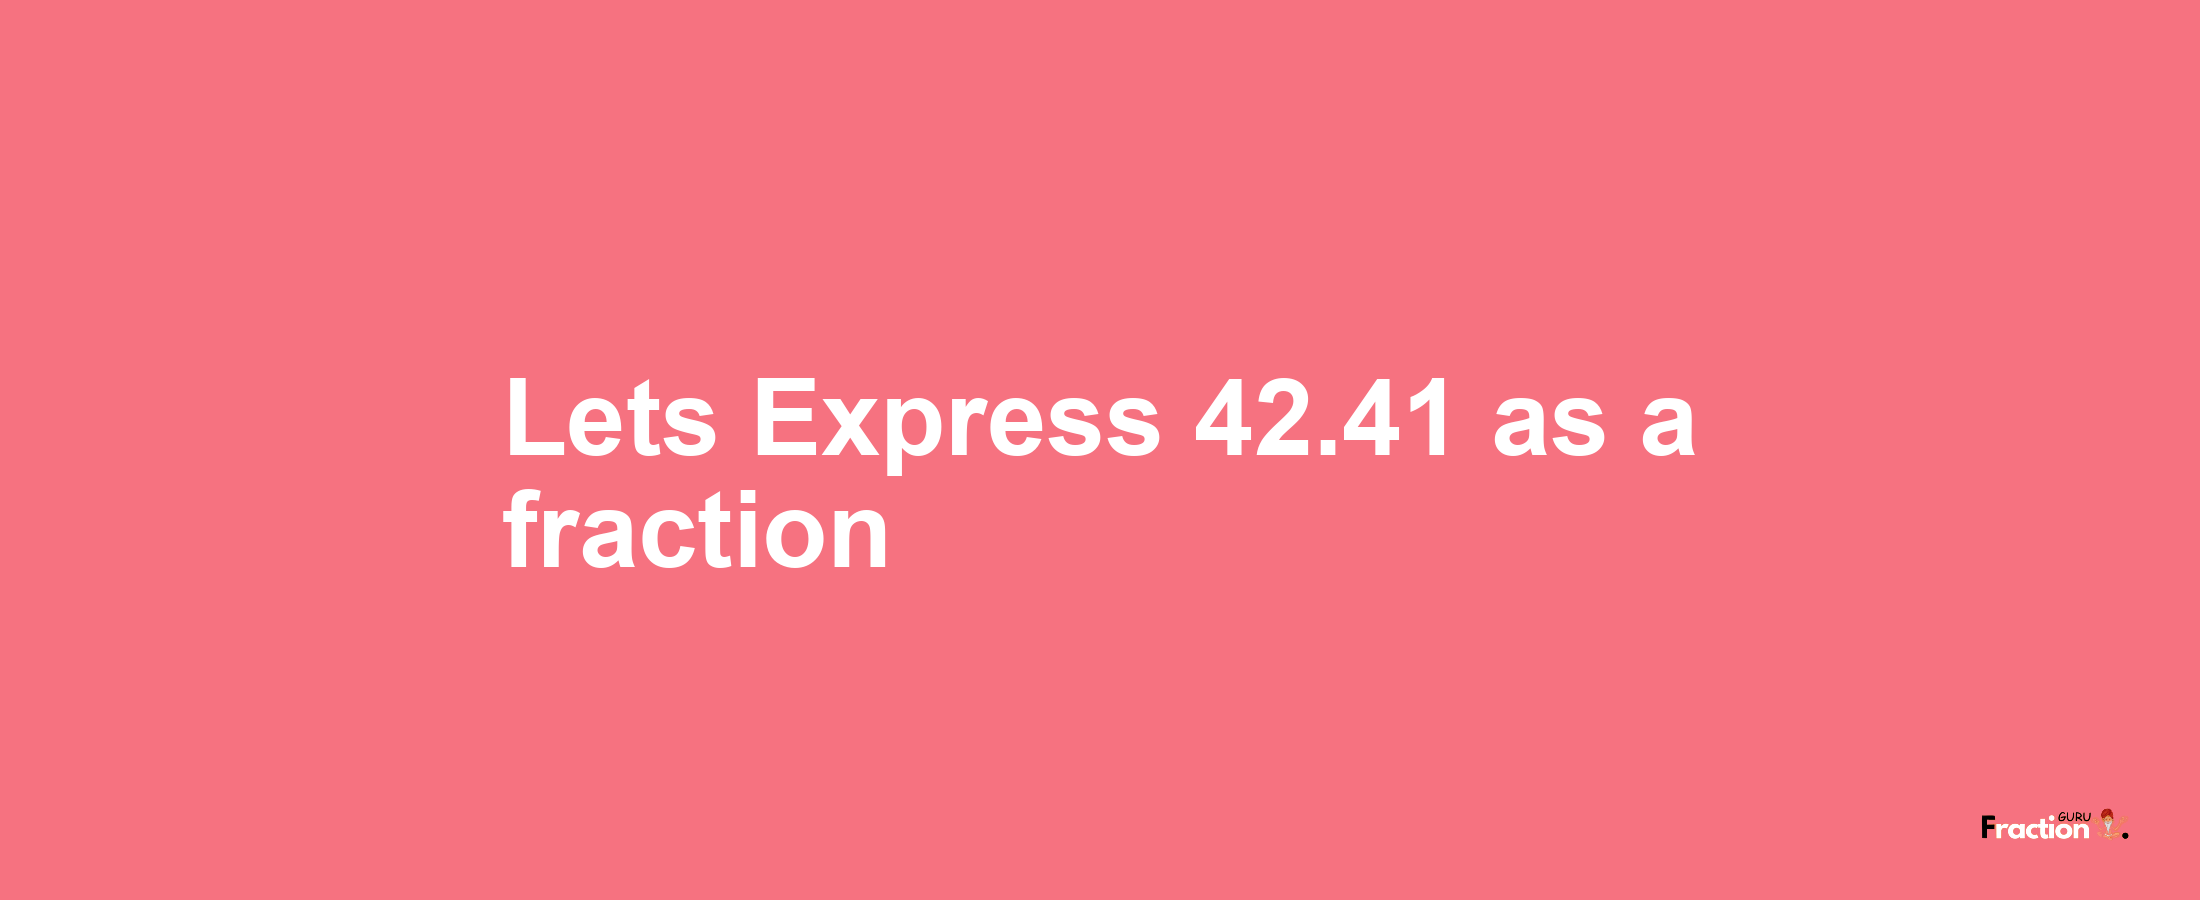 Lets Express 42.41 as afraction